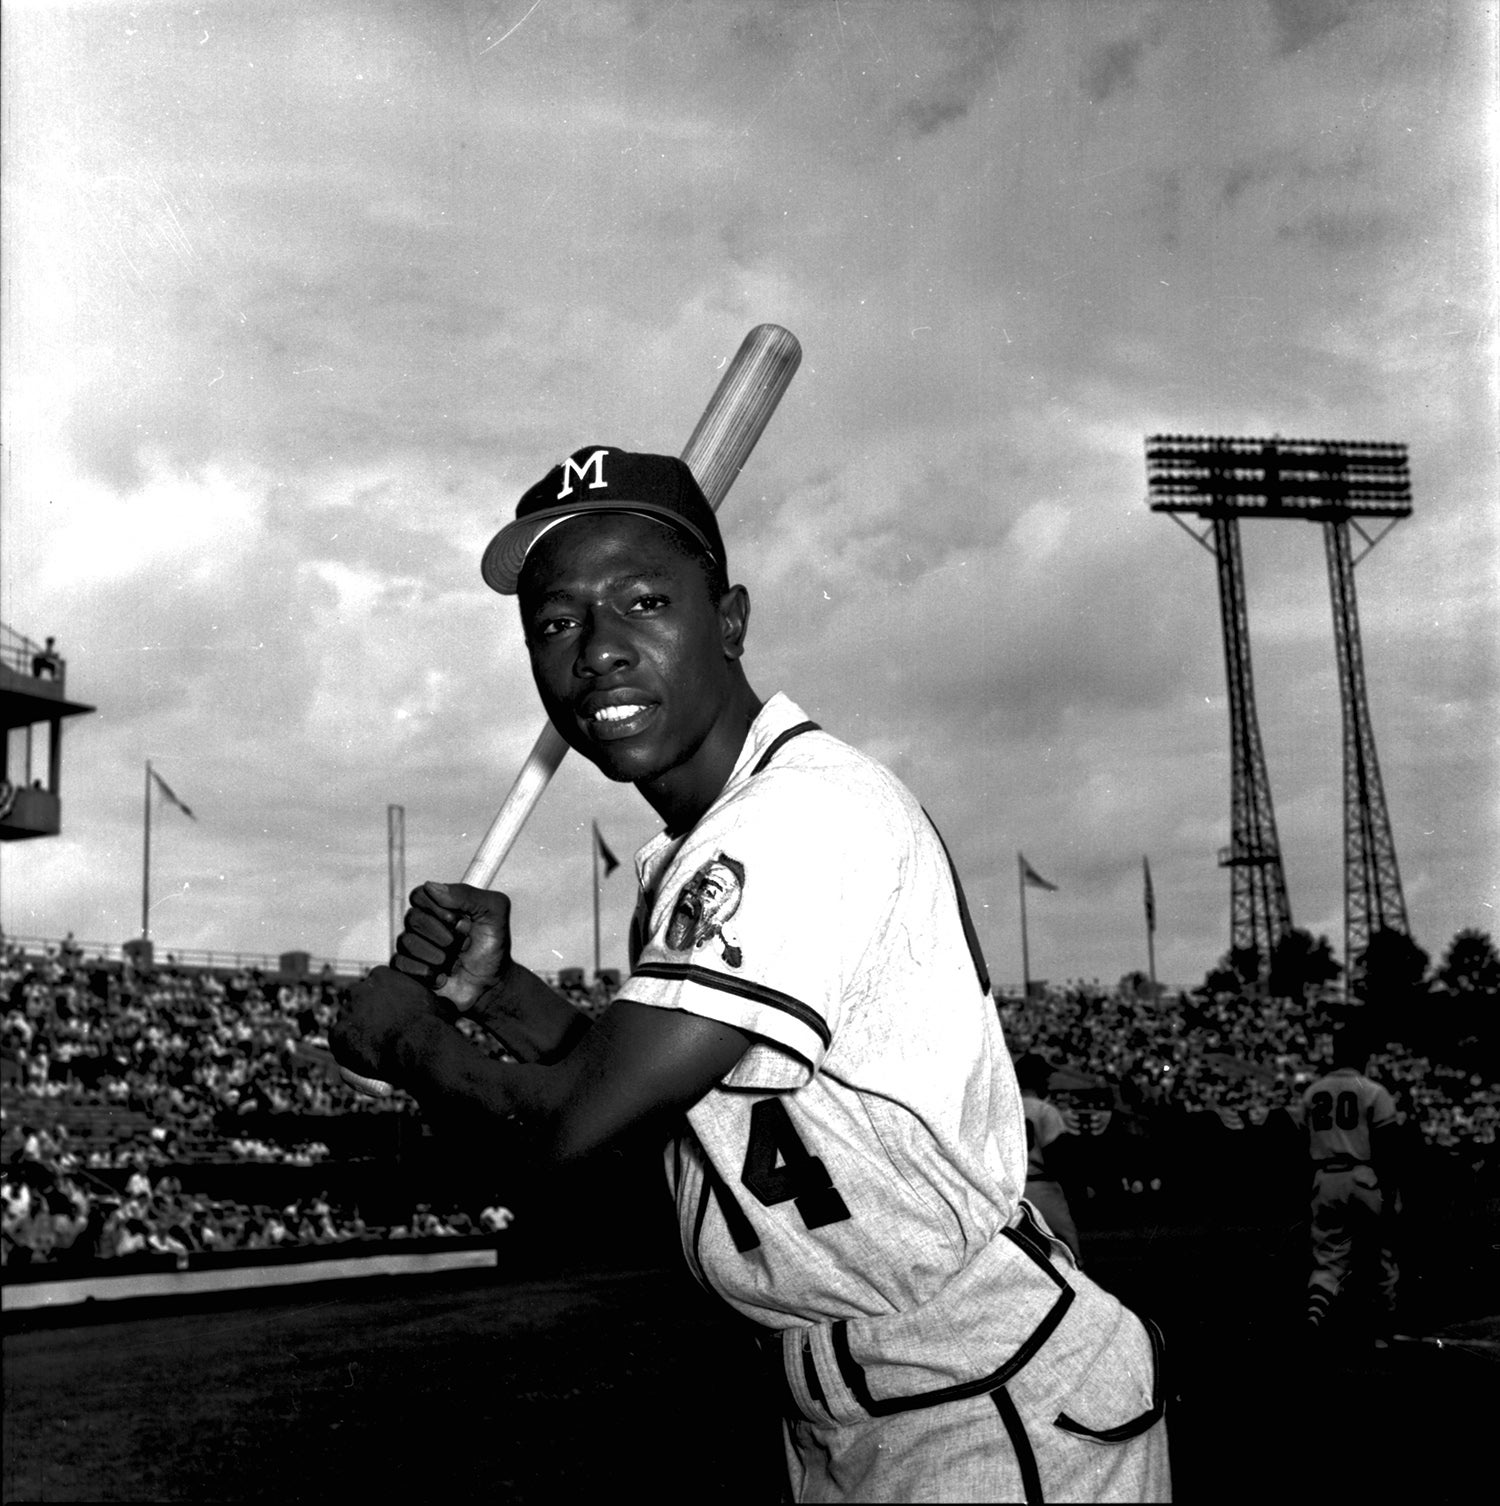 The Braves trade Hank Aaron to the Brewers 